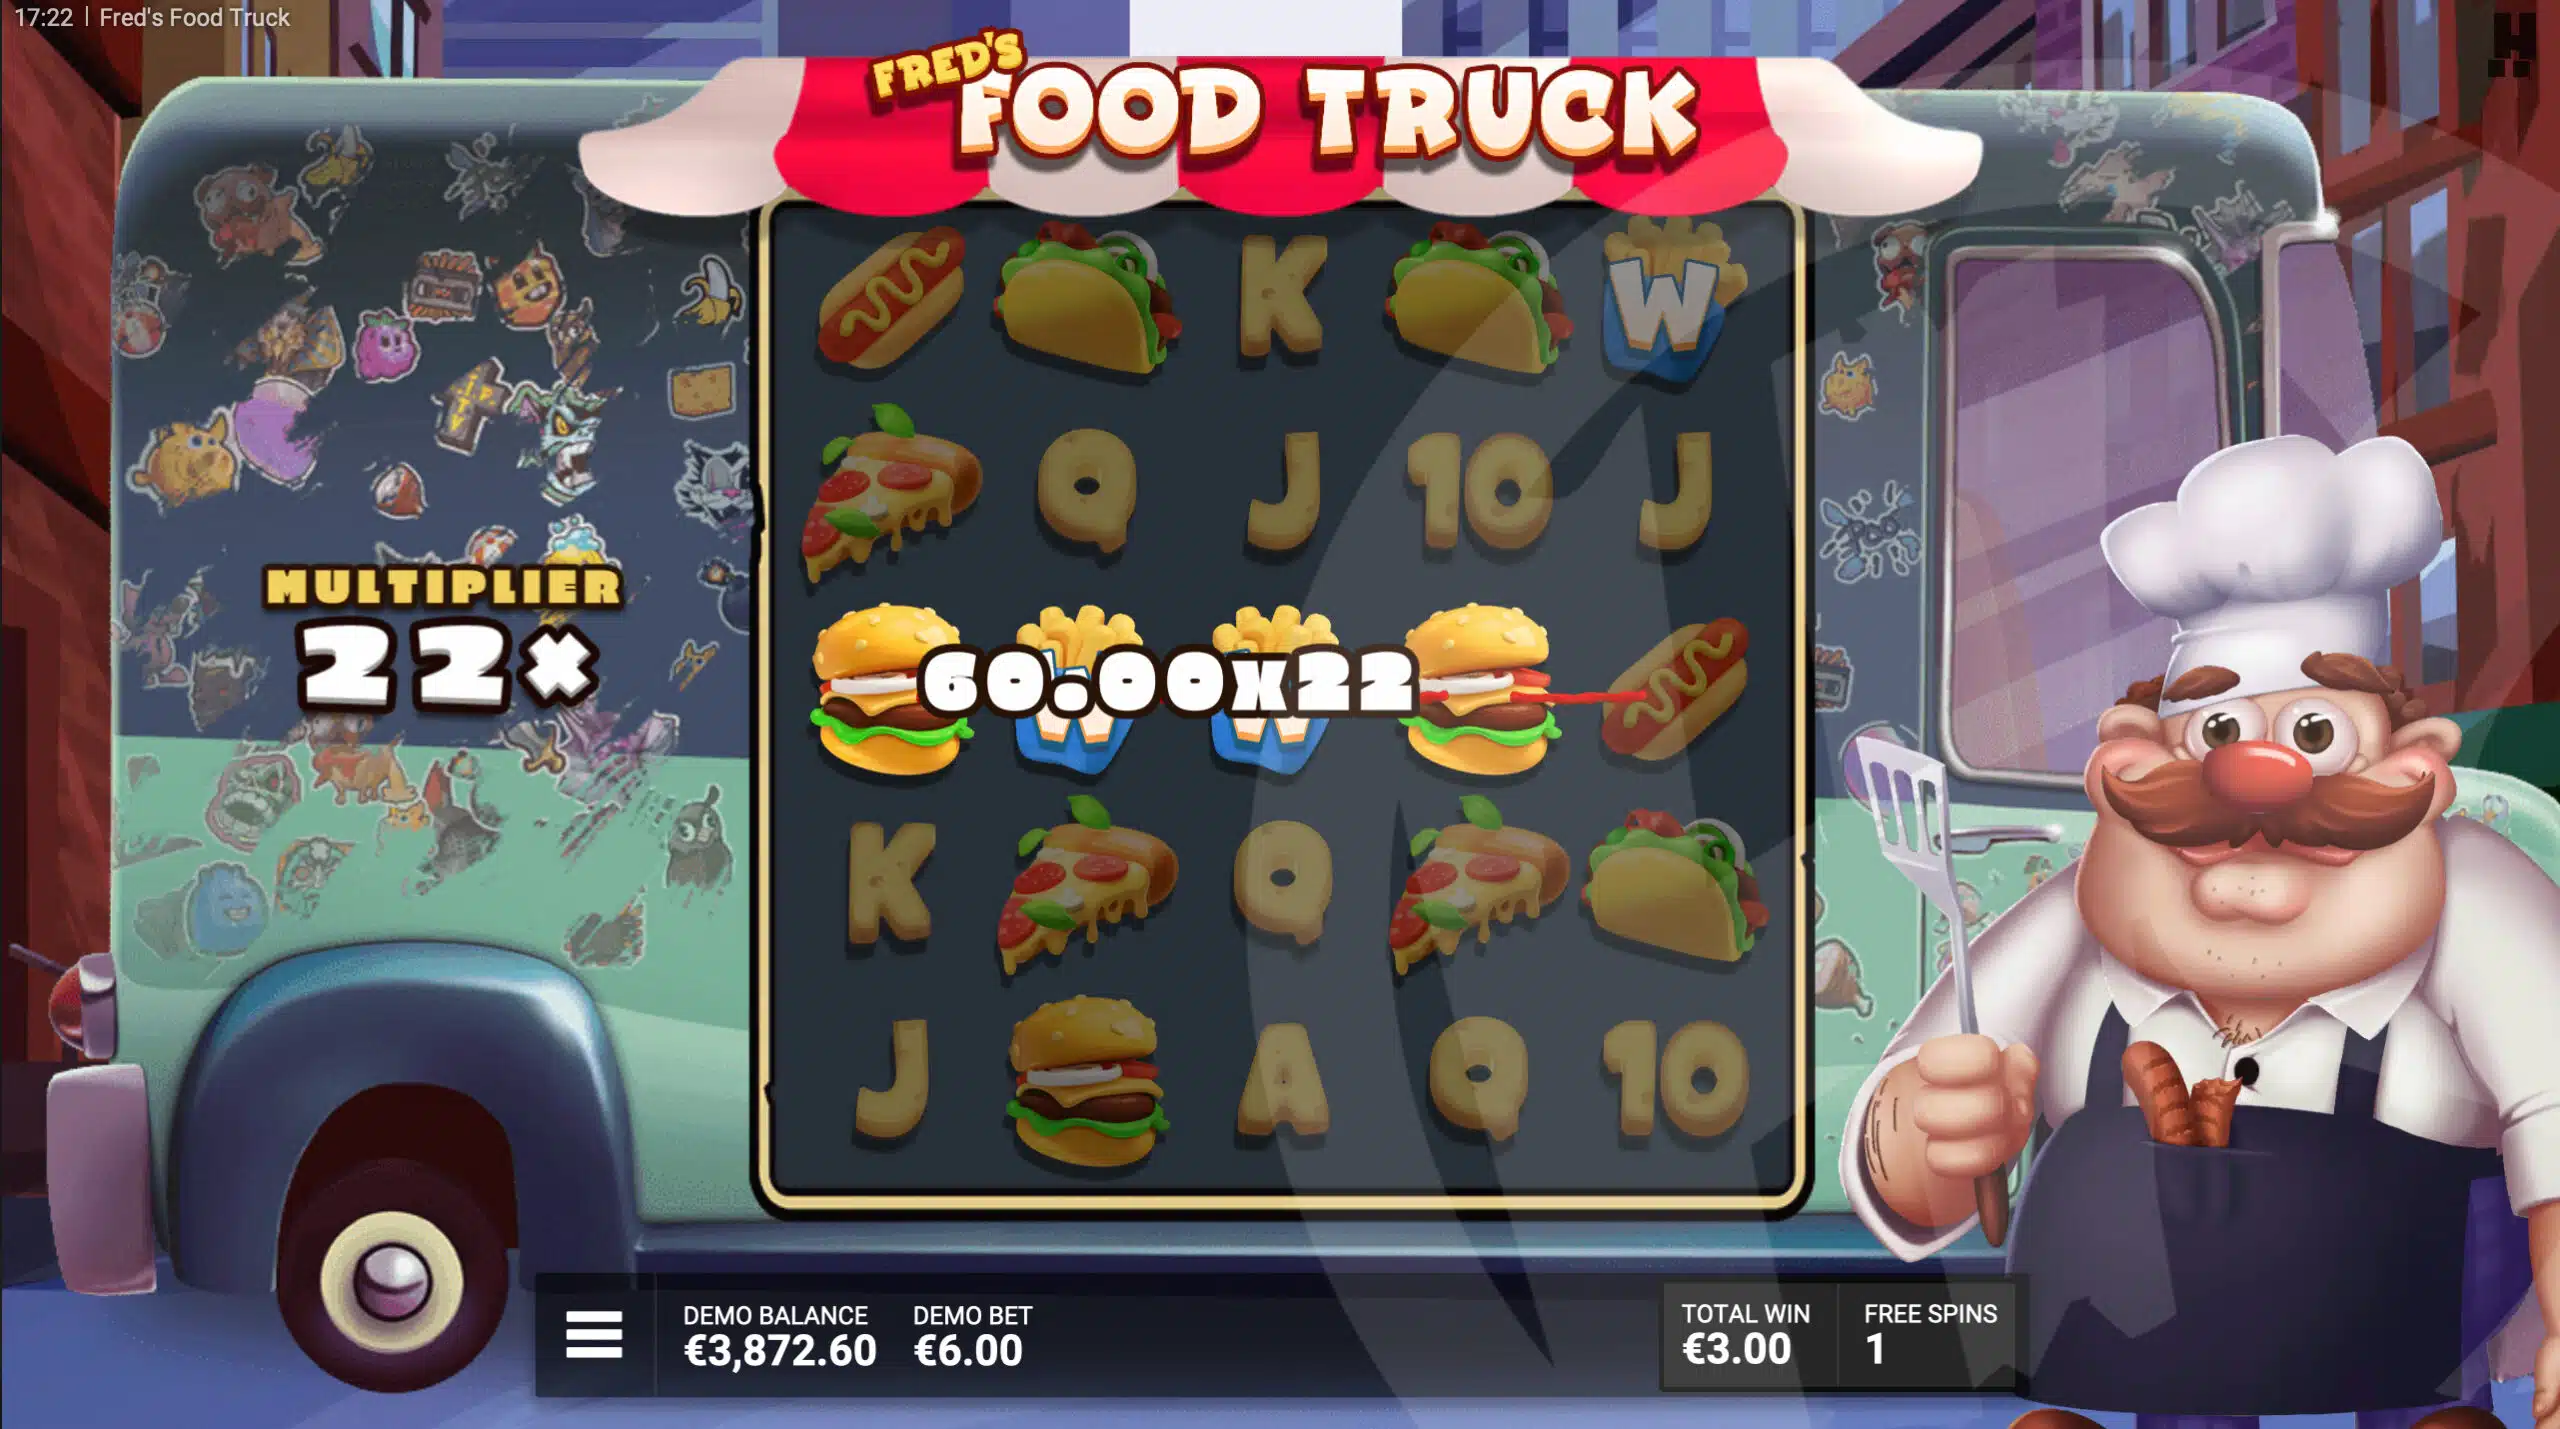 Fred's Food Truck Small Menu Free Spins Feature